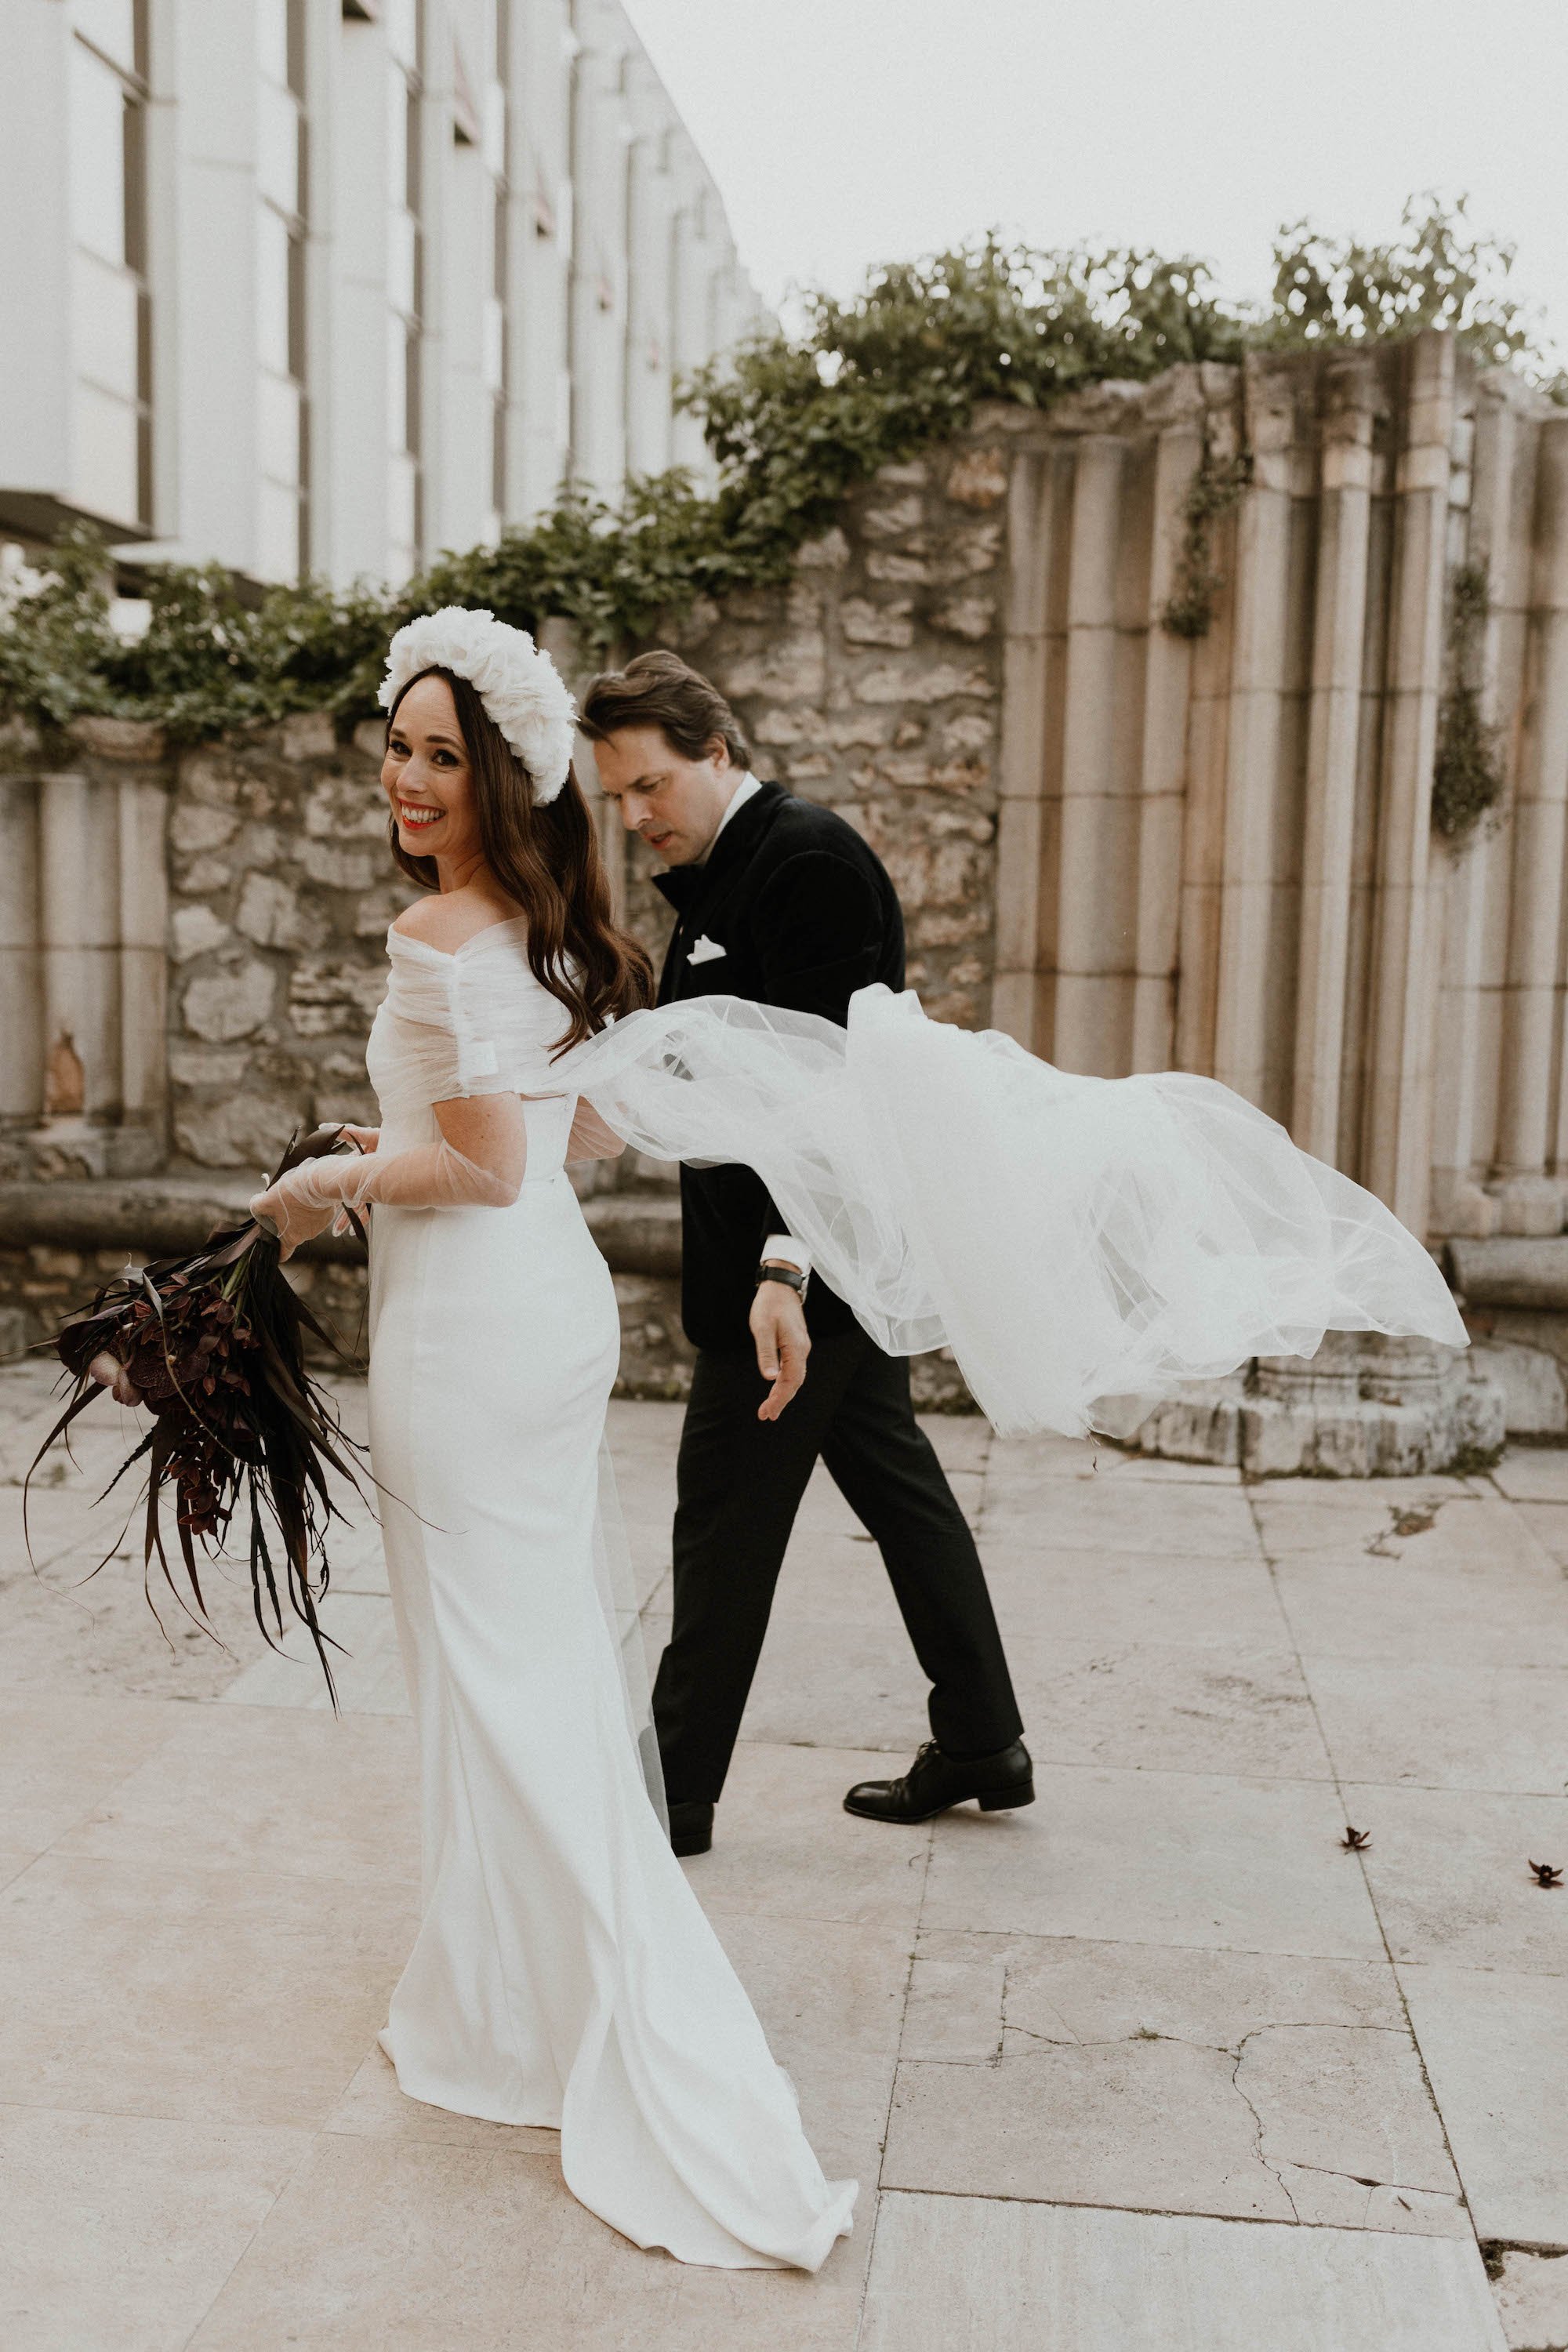 Beautiful bride Zsuzsa wore the Oliver Dress, Manet cape and Ariel bow | Wedding dress by Halfpenny London